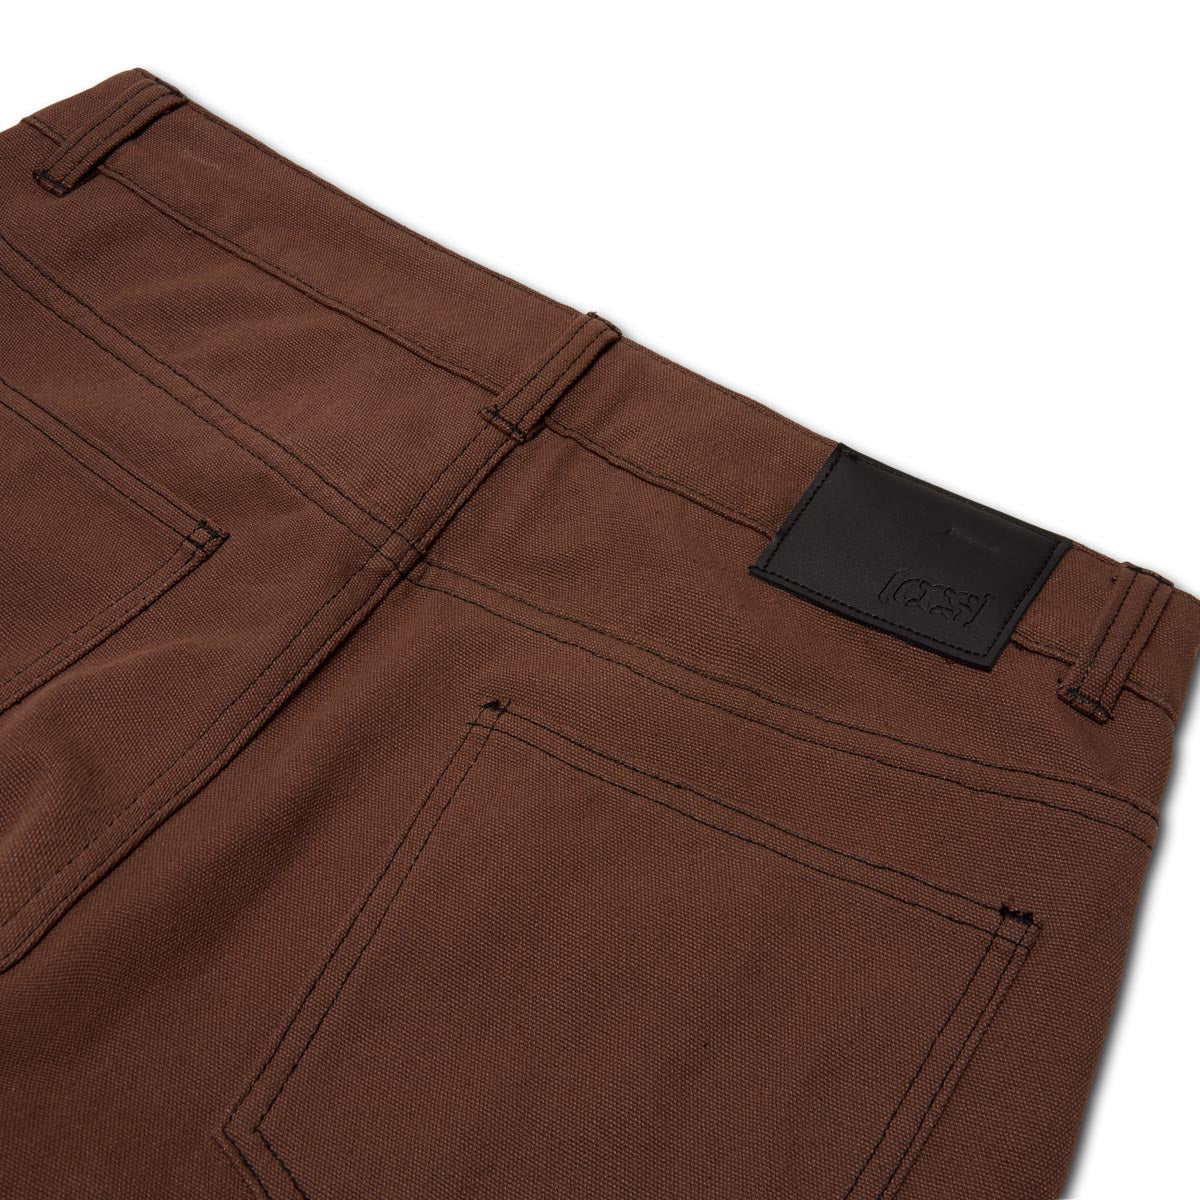 CCS Double Knee Original Relaxed Canvas Pants - Brown/Black image 6